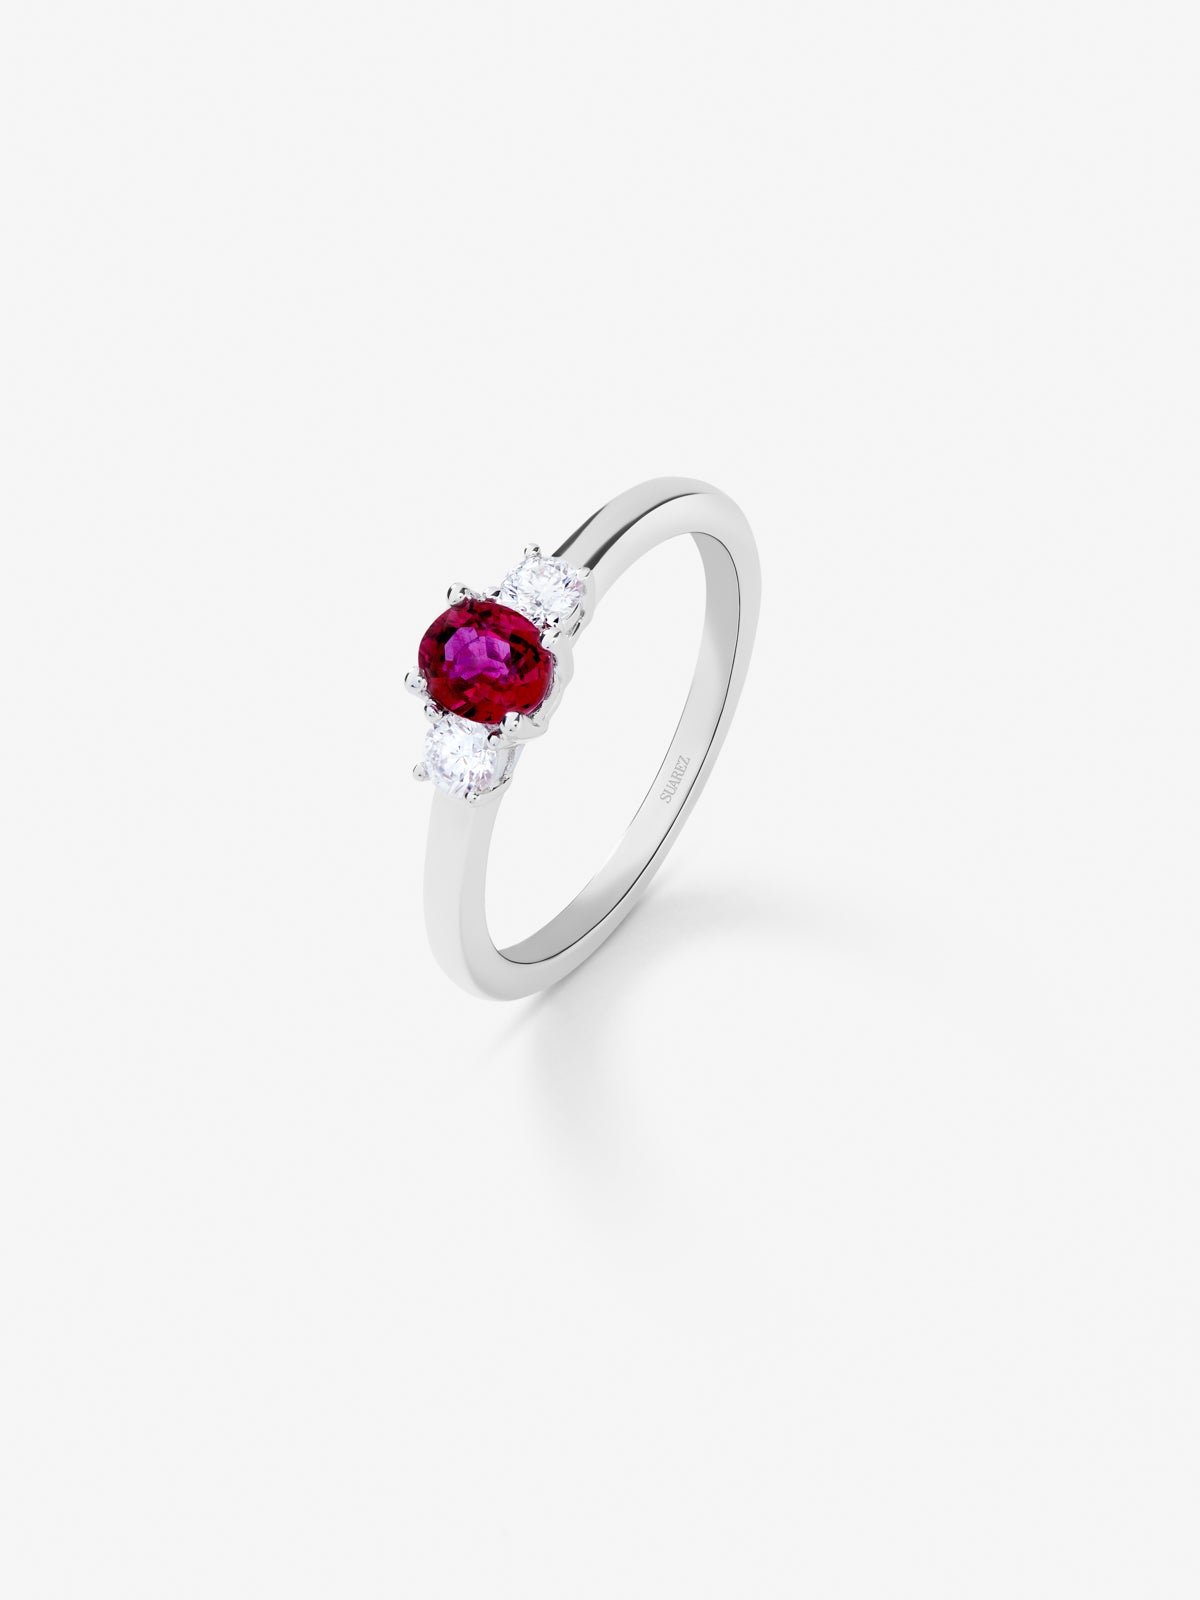 18K white gold triple ring with oval cut ruby ​​of 0.45 cts and 2 brilliant cut diamonds with a total of 0.2 cts